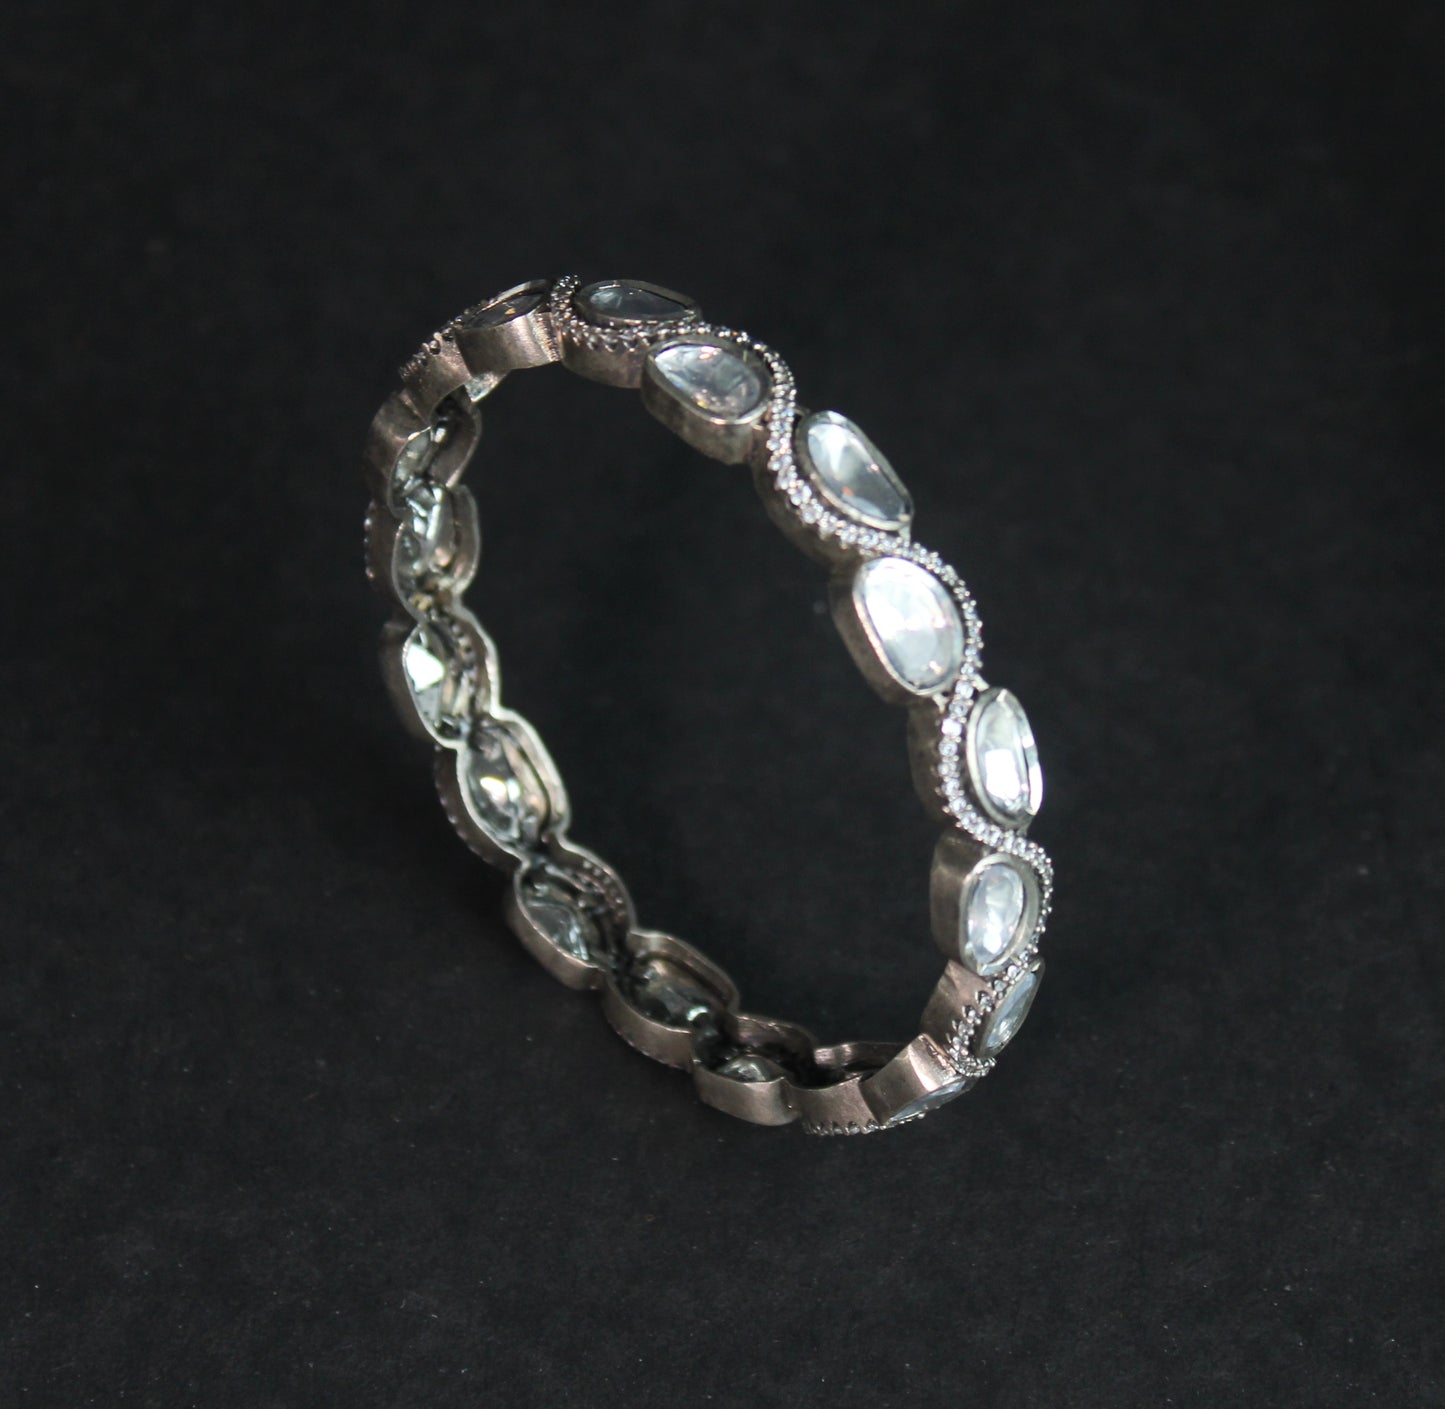 OXIDIZED BANGLE IN  92.5 STERLING SILVER WITH POLKI WITH ZIRCONIA stones